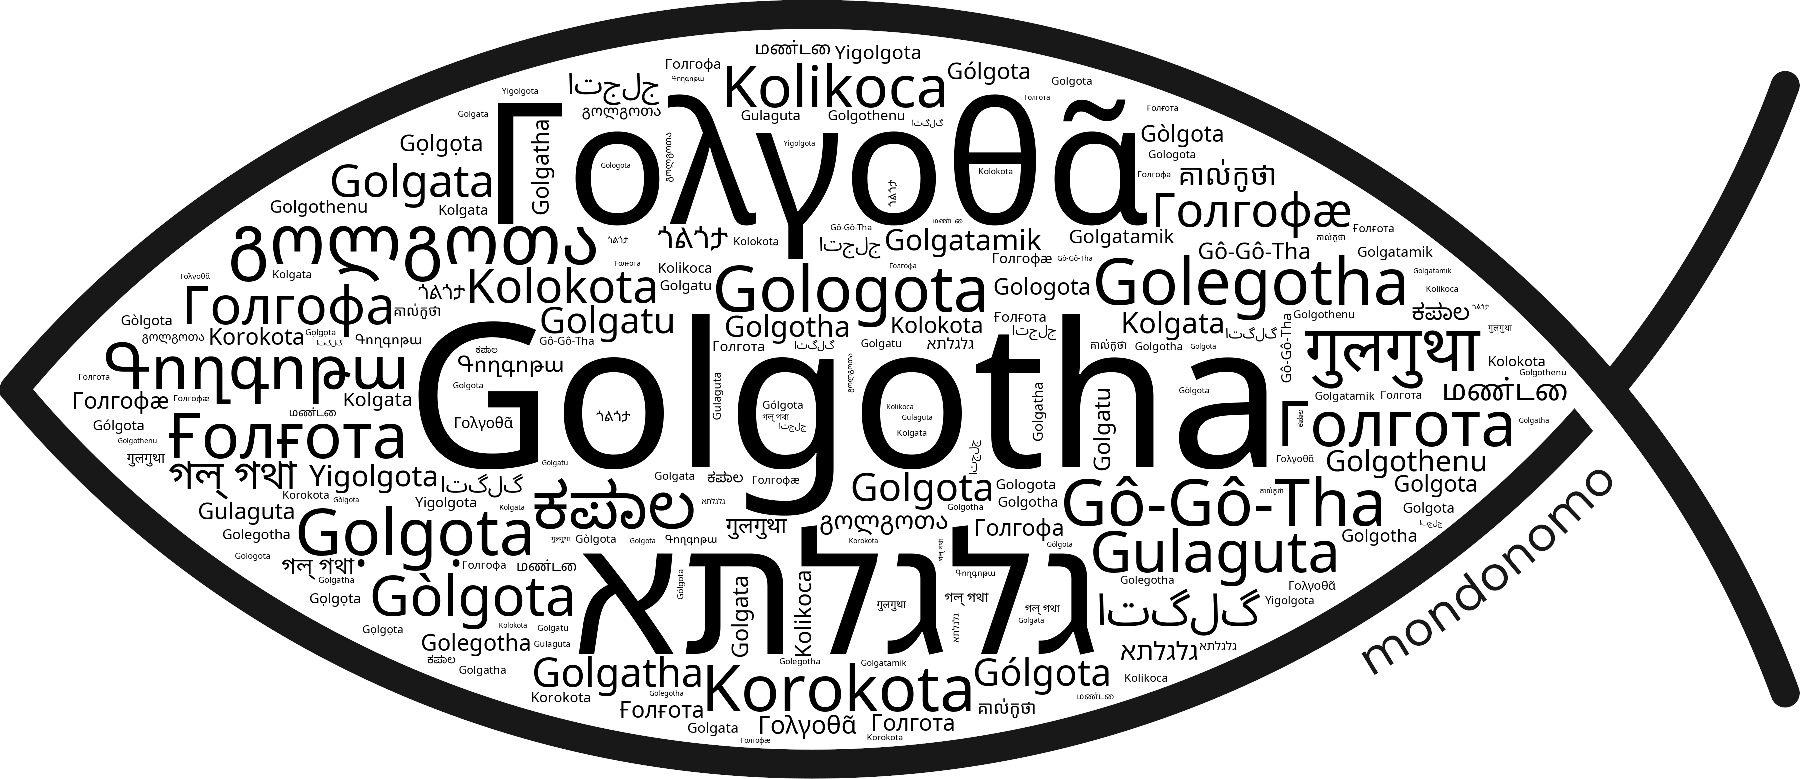 Name Golgotha in the world's Bibles